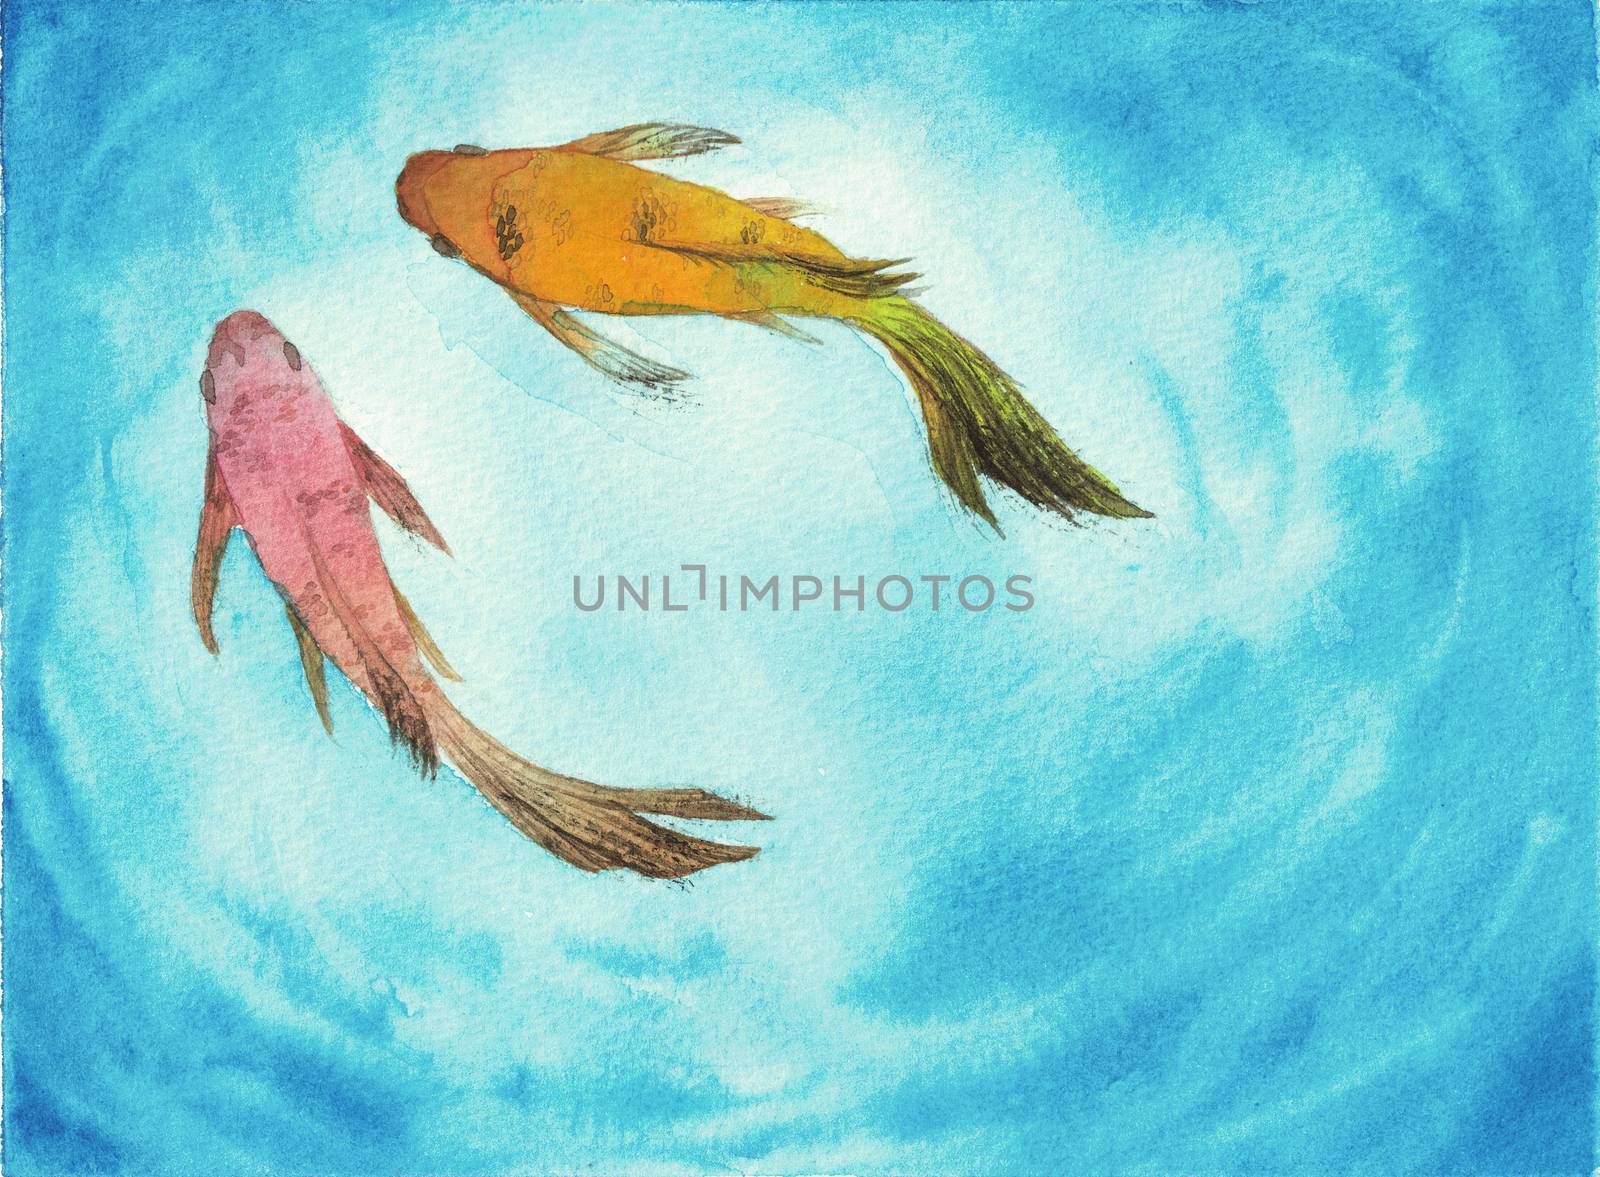 Watercolor hand painting, two koi carp fish in pond, symbol of good luck and prosperity by Ungamrung